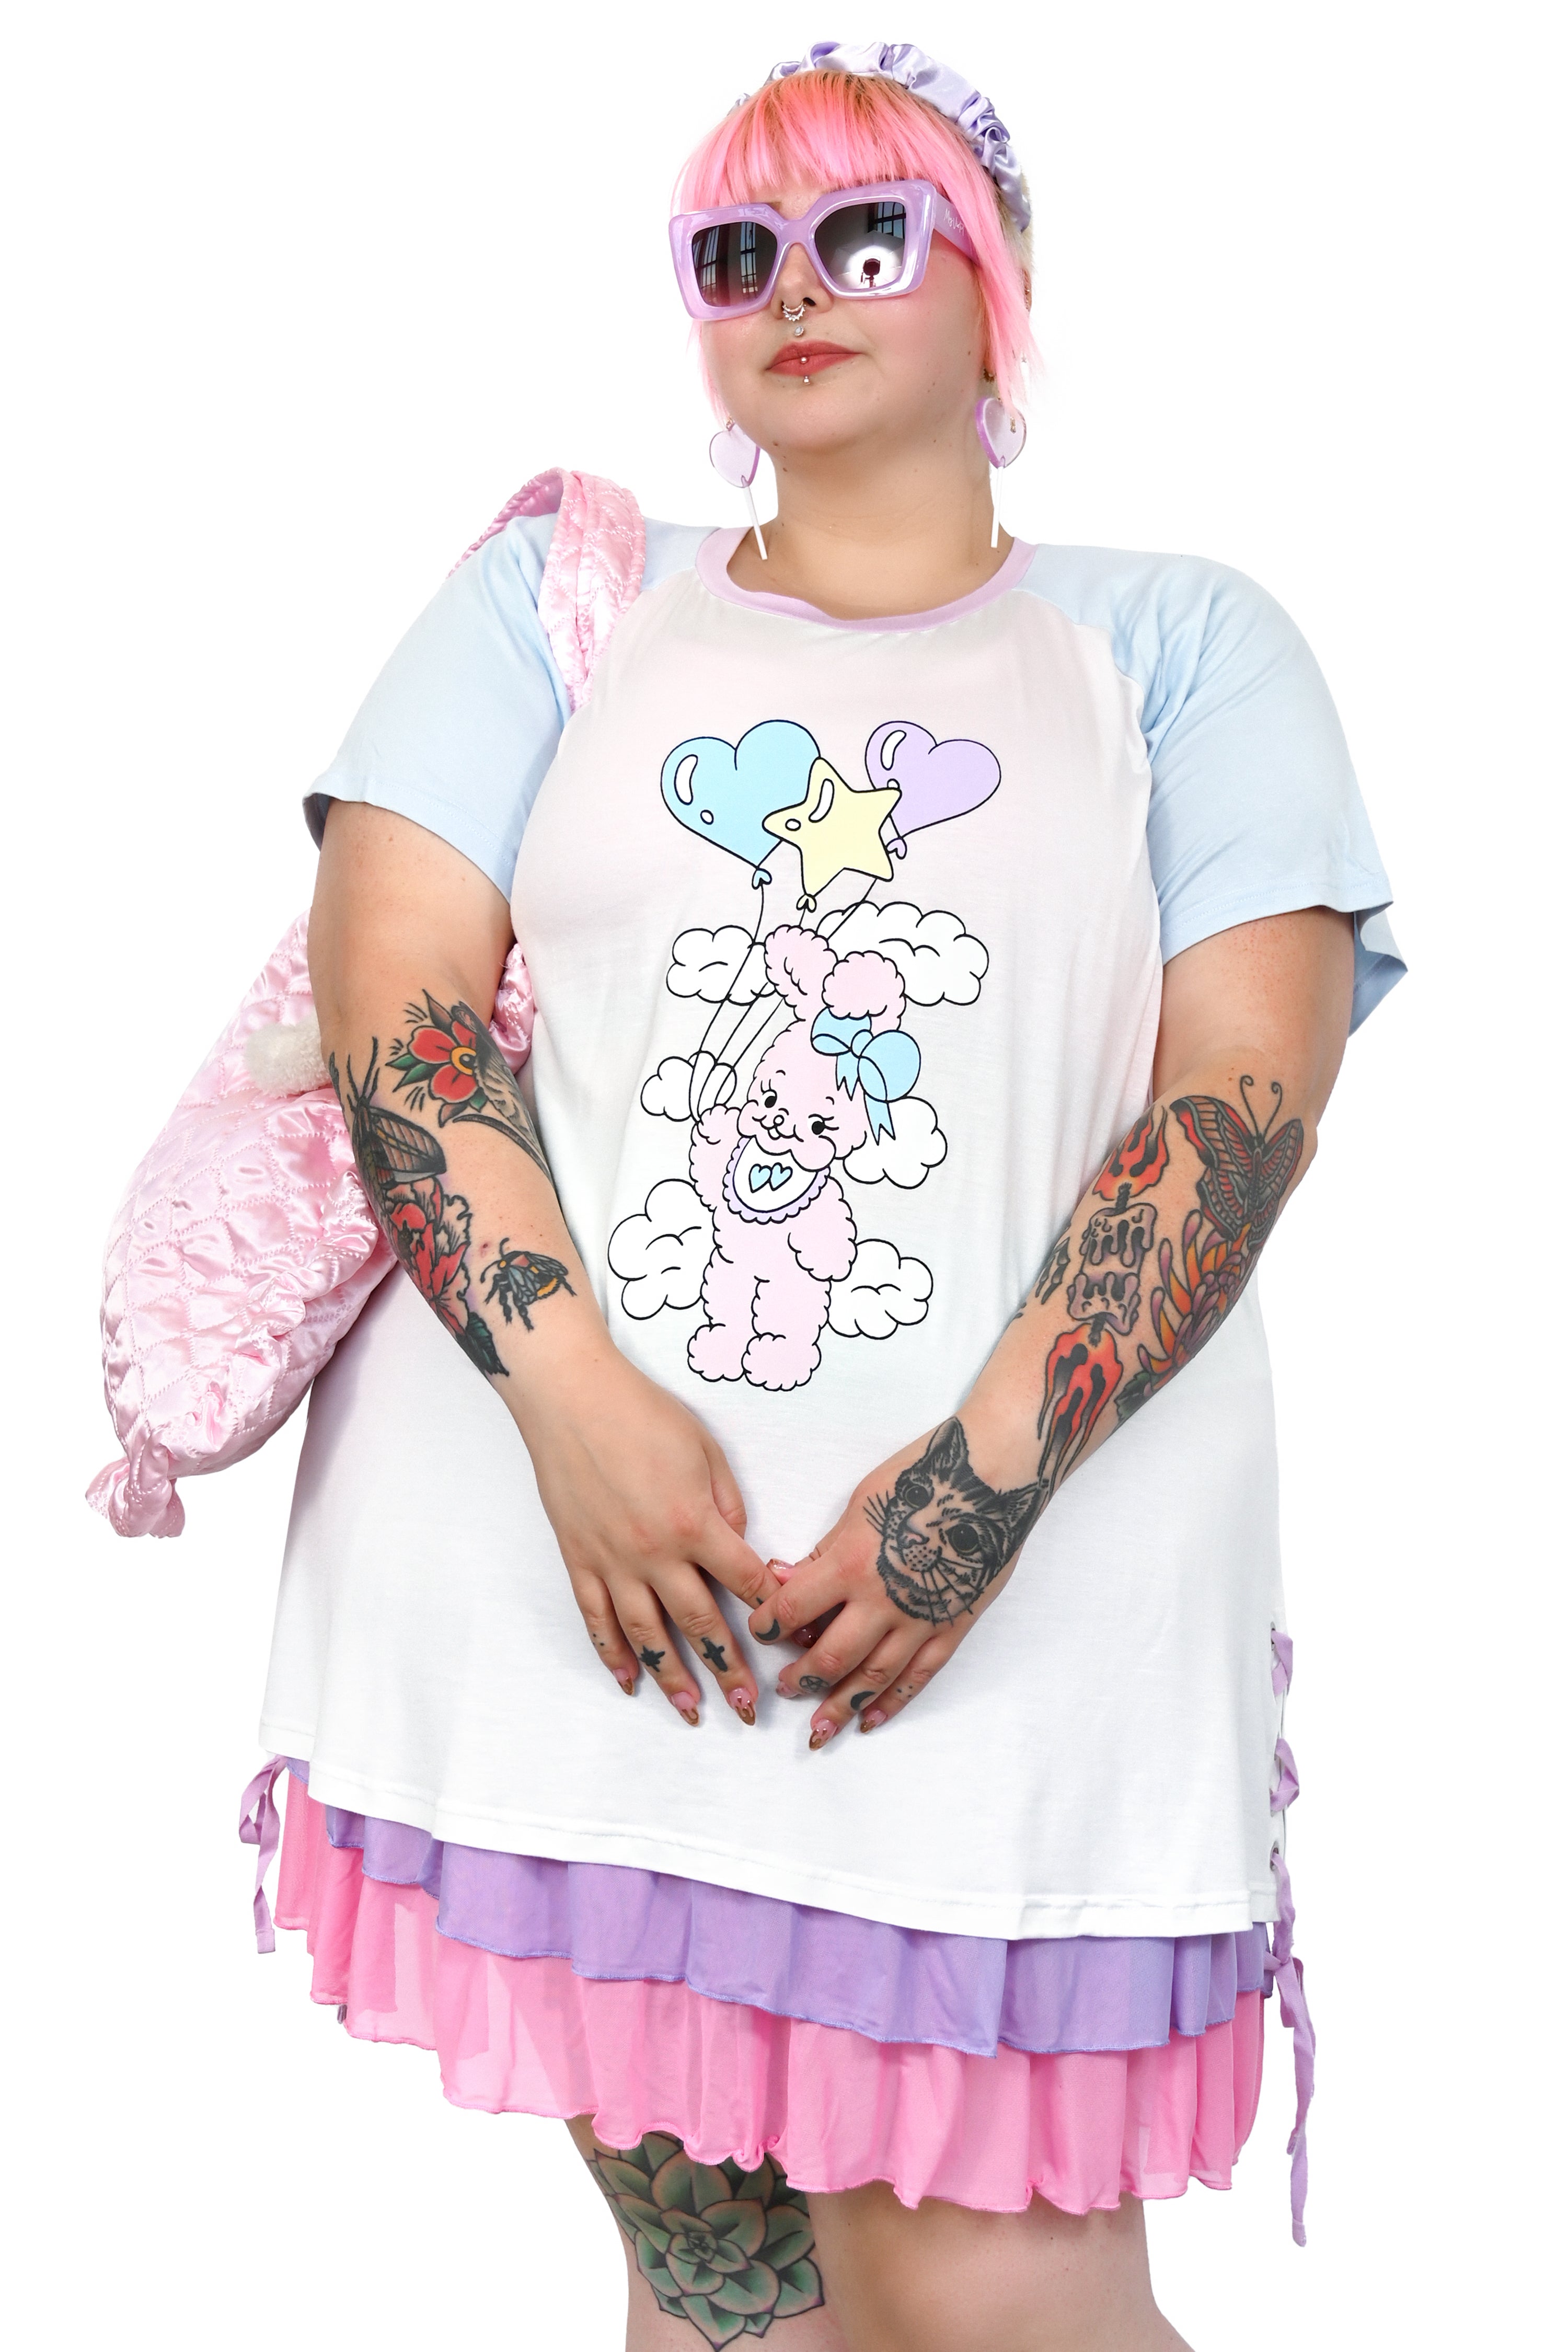 Care free bunny floating through the clouds on an array of cute balloons. Colorblock sleeves and collar and the cutest grommet lace up side detail. But that's not all, turn around and see that Cry Bear has your back!